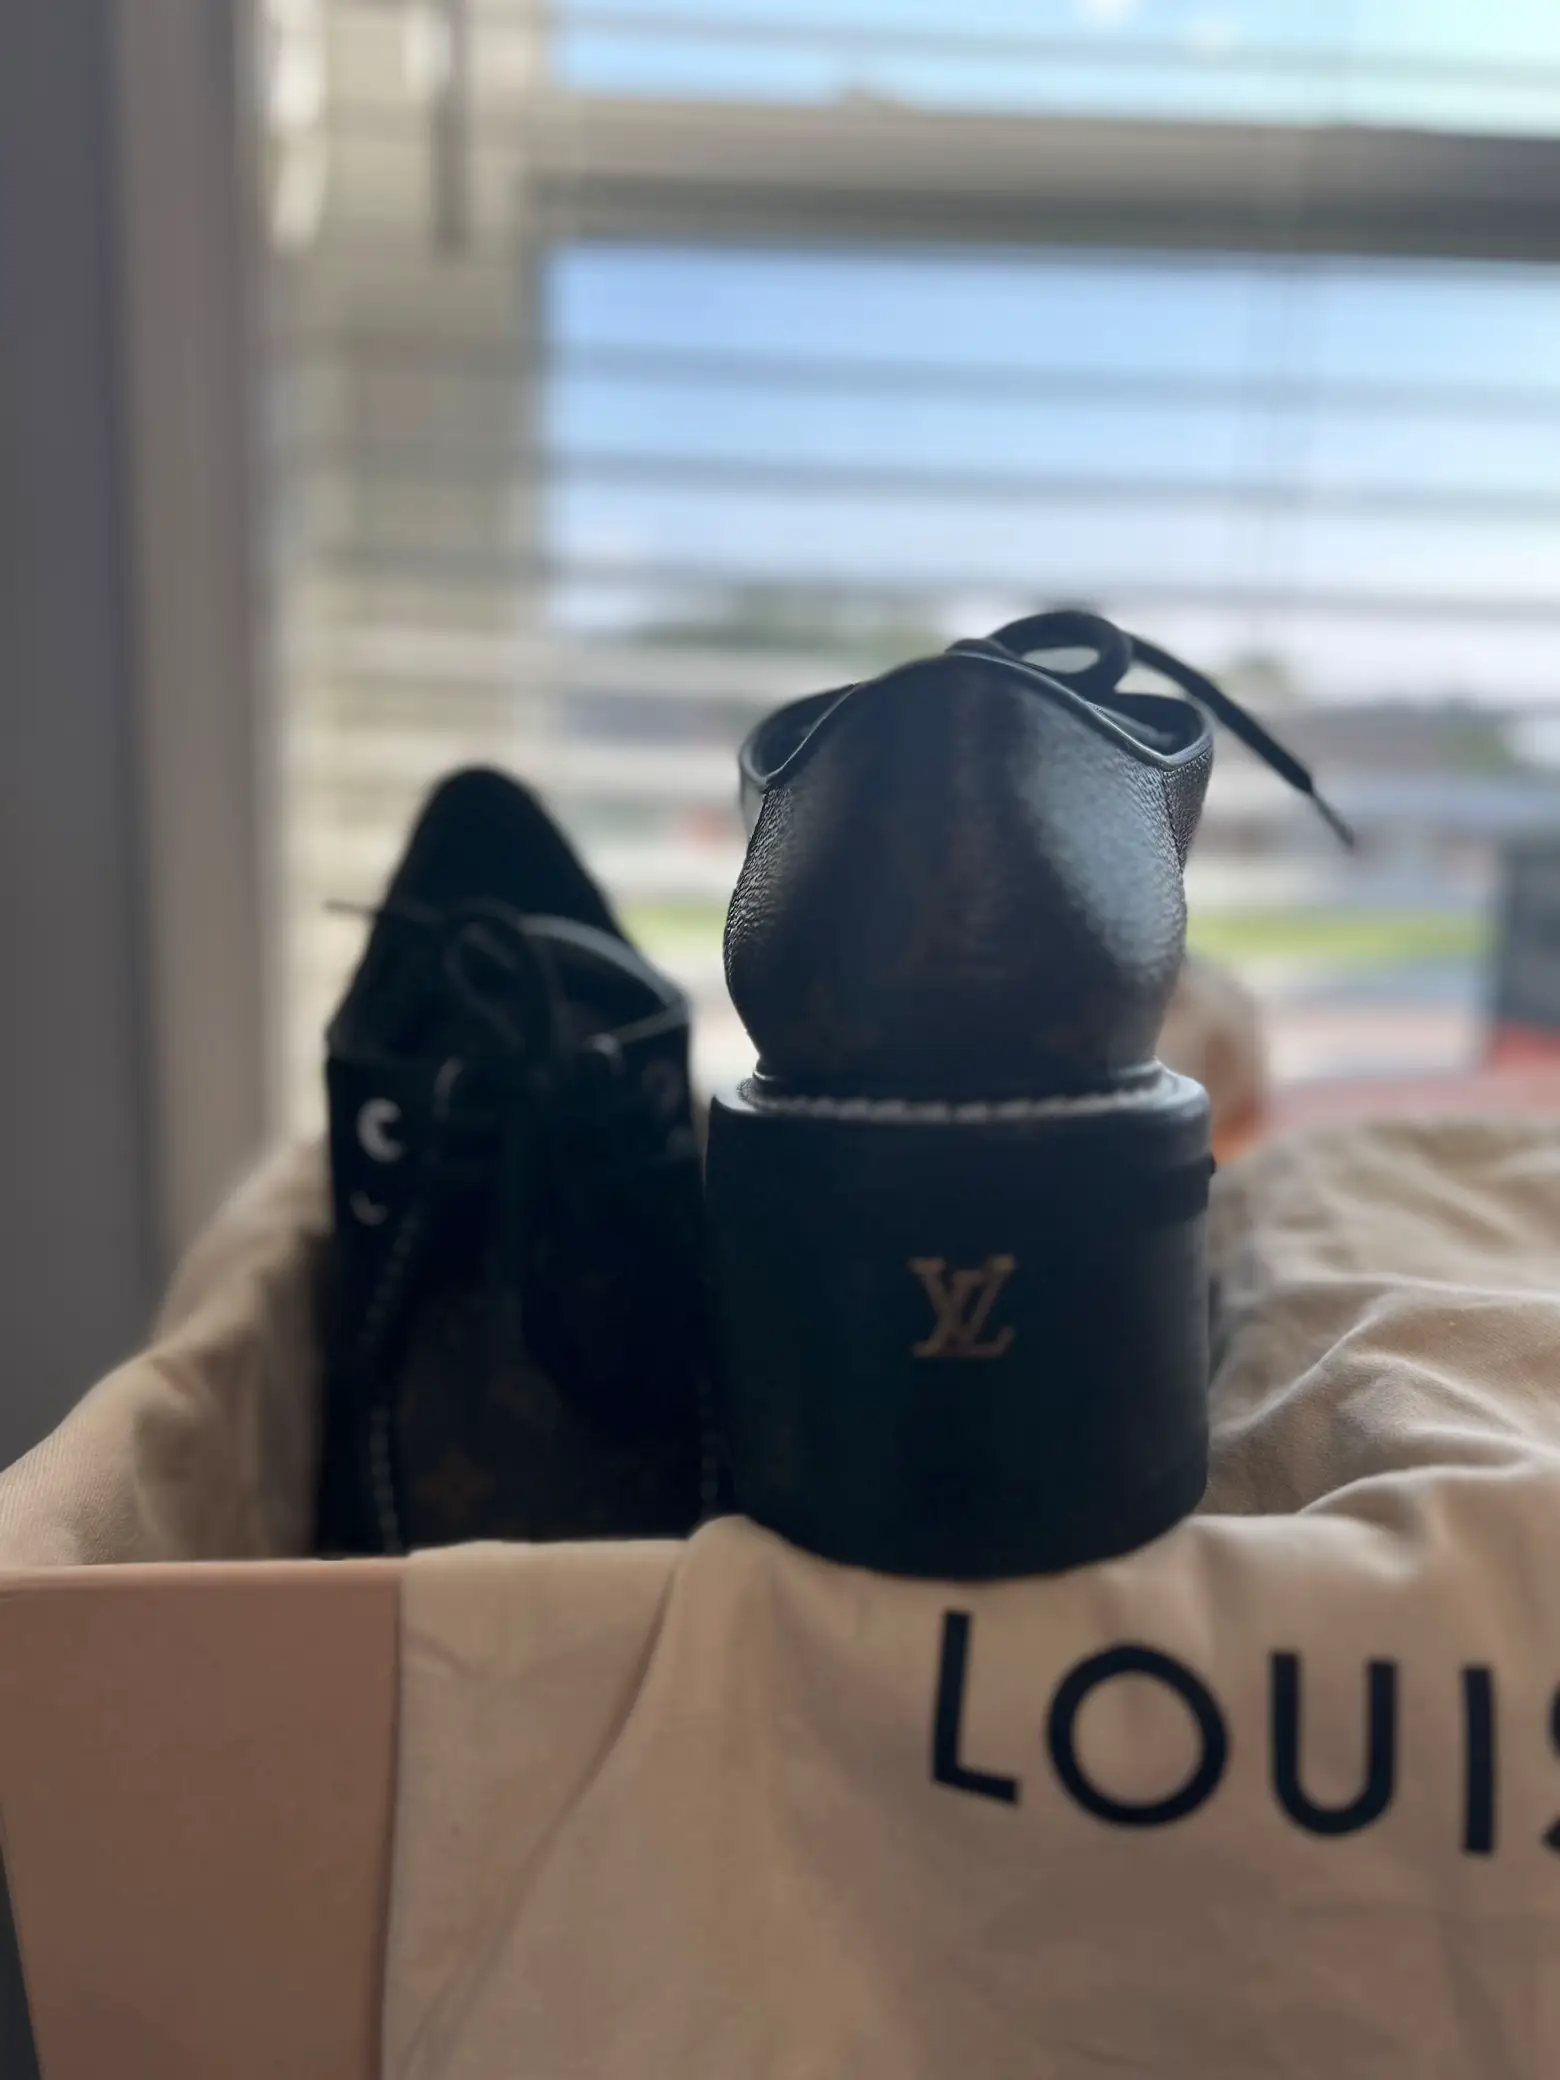 Unboxing my LV bag, Louis Vuitton On The Go